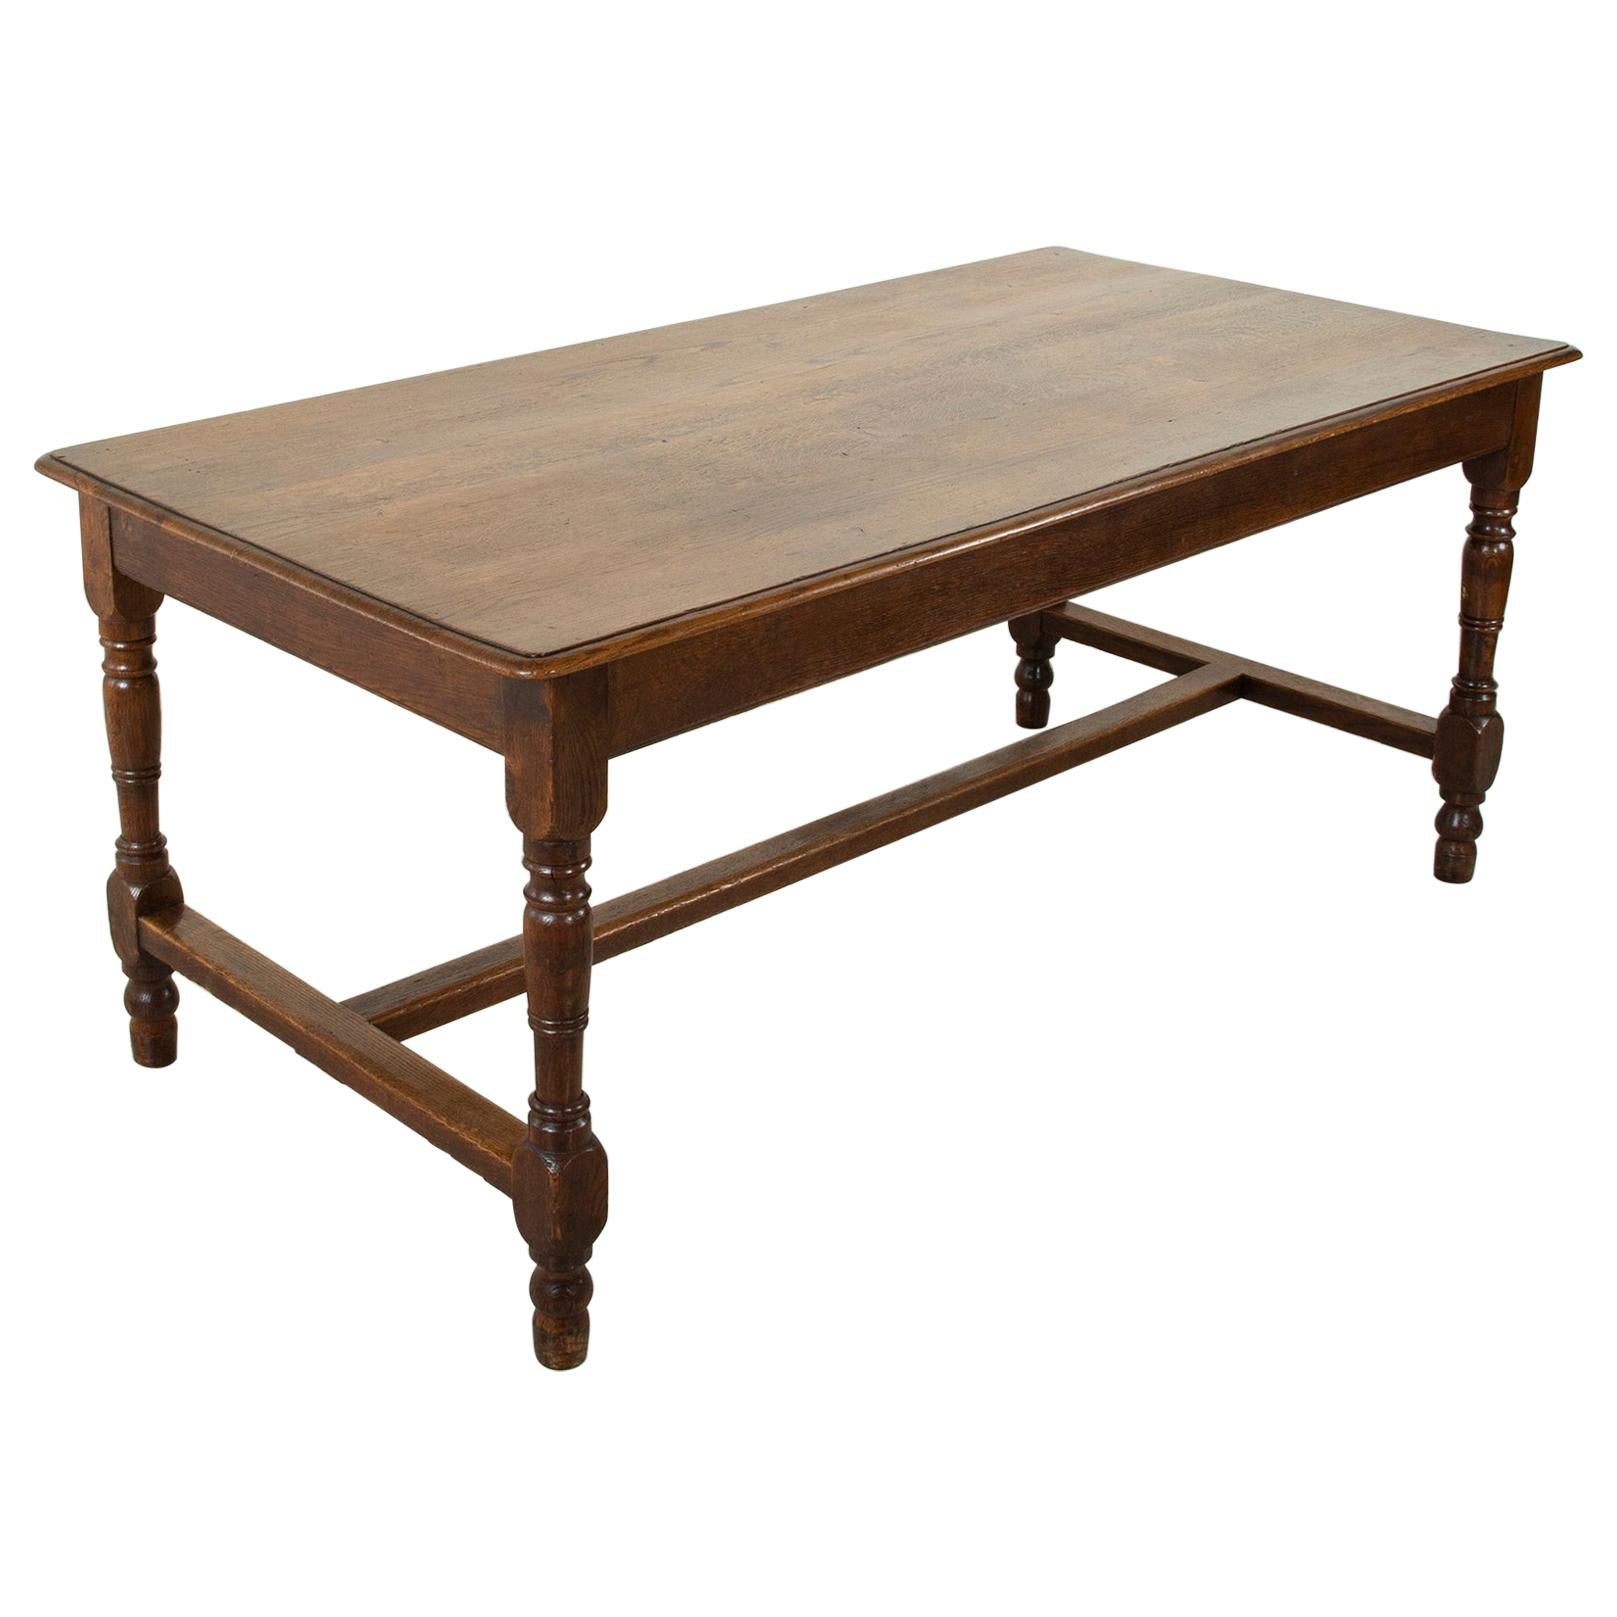 French Artisan Made Oak Farm Table or Dining Table, circa 1900